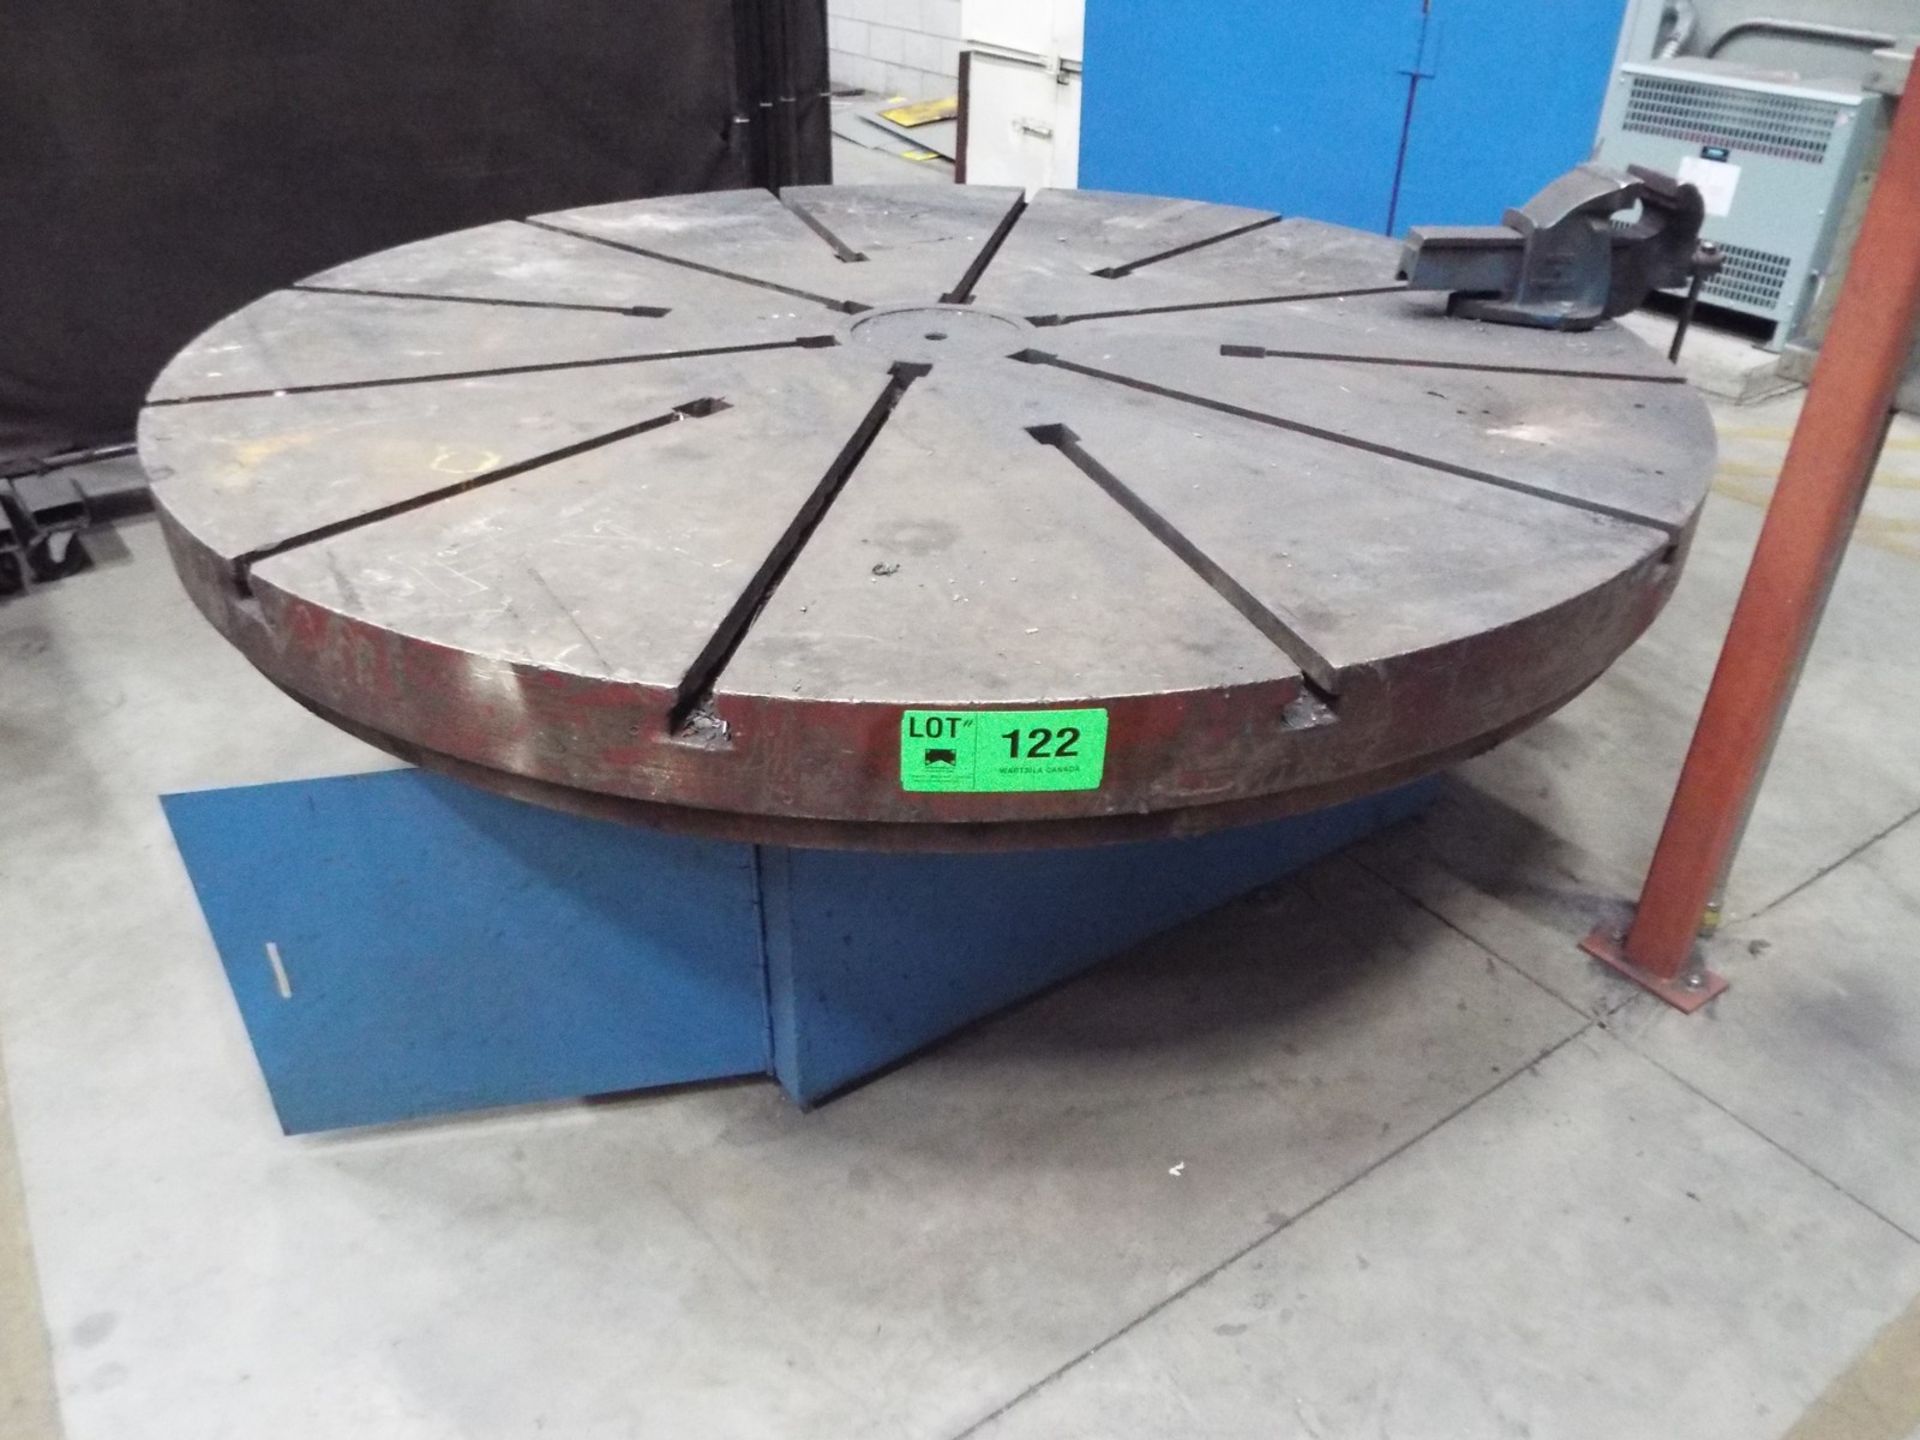 MFG. UNKNOWN 84" DIAMETER ROTARY TABLE WITH 6" BENCH VISE (CI)